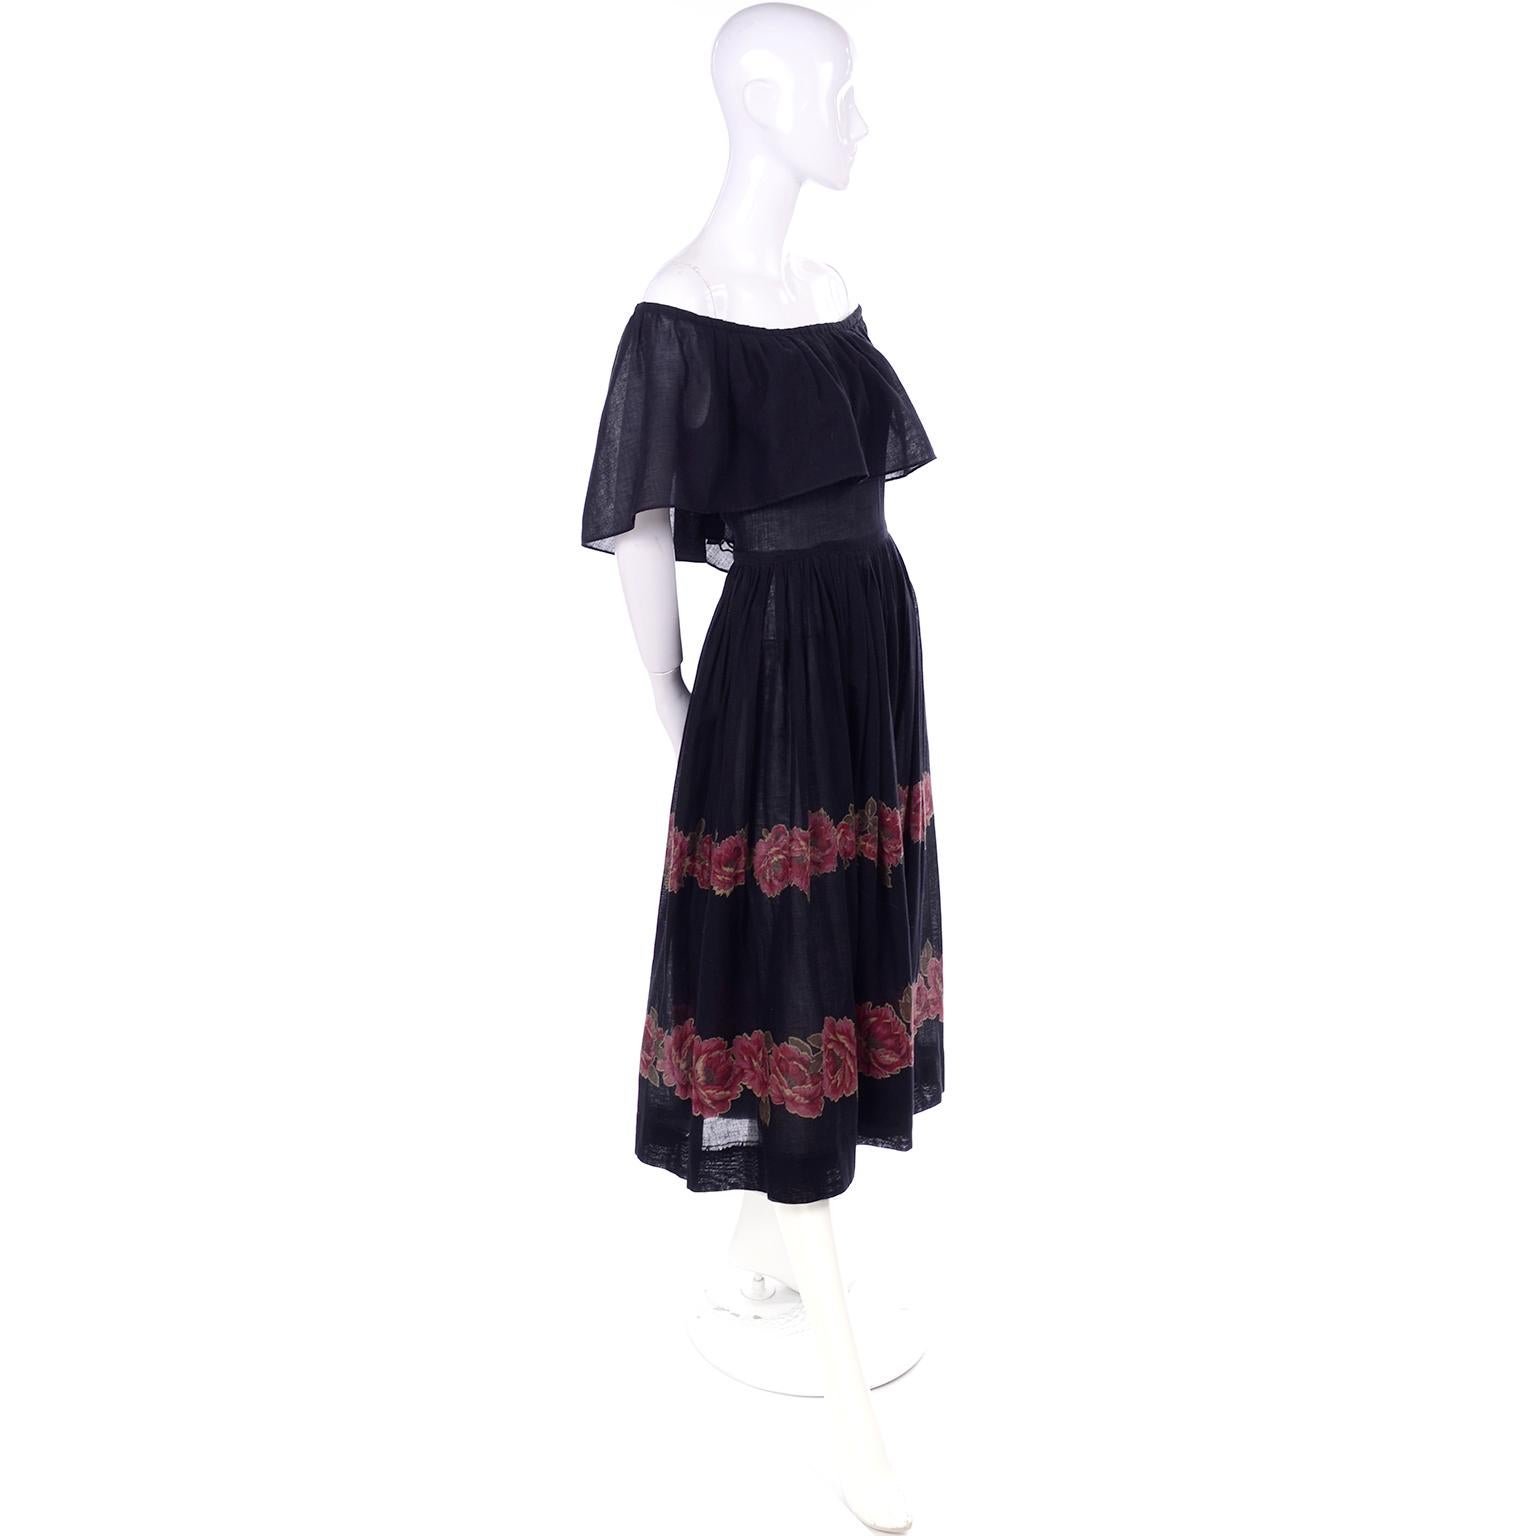 This is a fun Albert Nipon vintage semi Sheer black cotton voile dress with two rows of rose floral print around the bottom of the skirt. The dress can be worn as shown or on the shoulders. We love Albert Nipon and really think he had a knack for